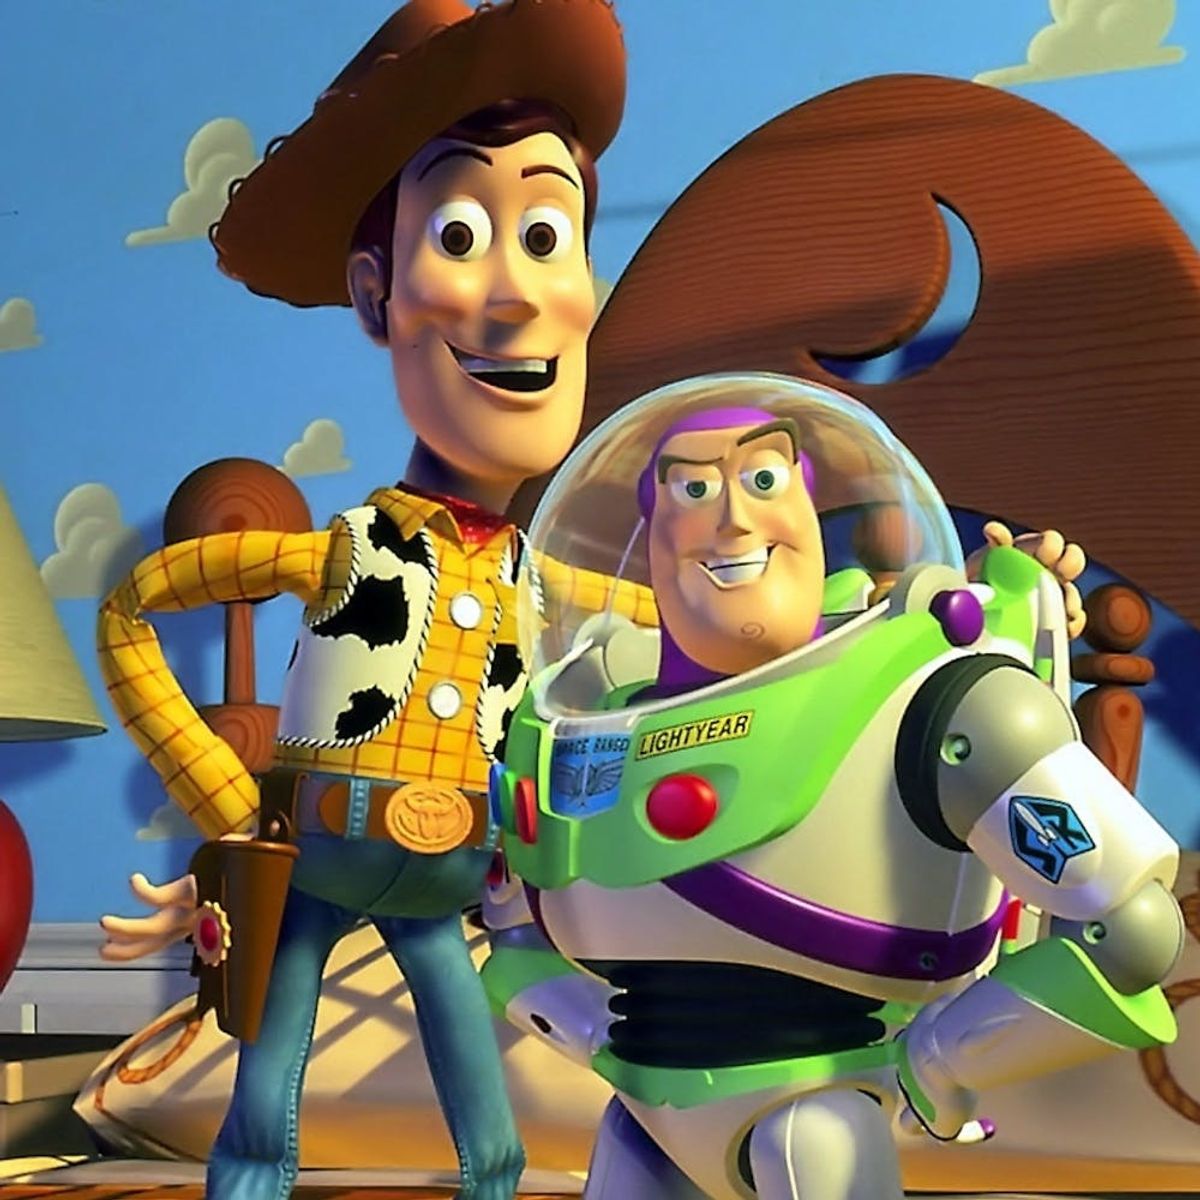 The First Full ‘Toy Story 4’ Trailer Is Finally Here and It’ll Make You Sob